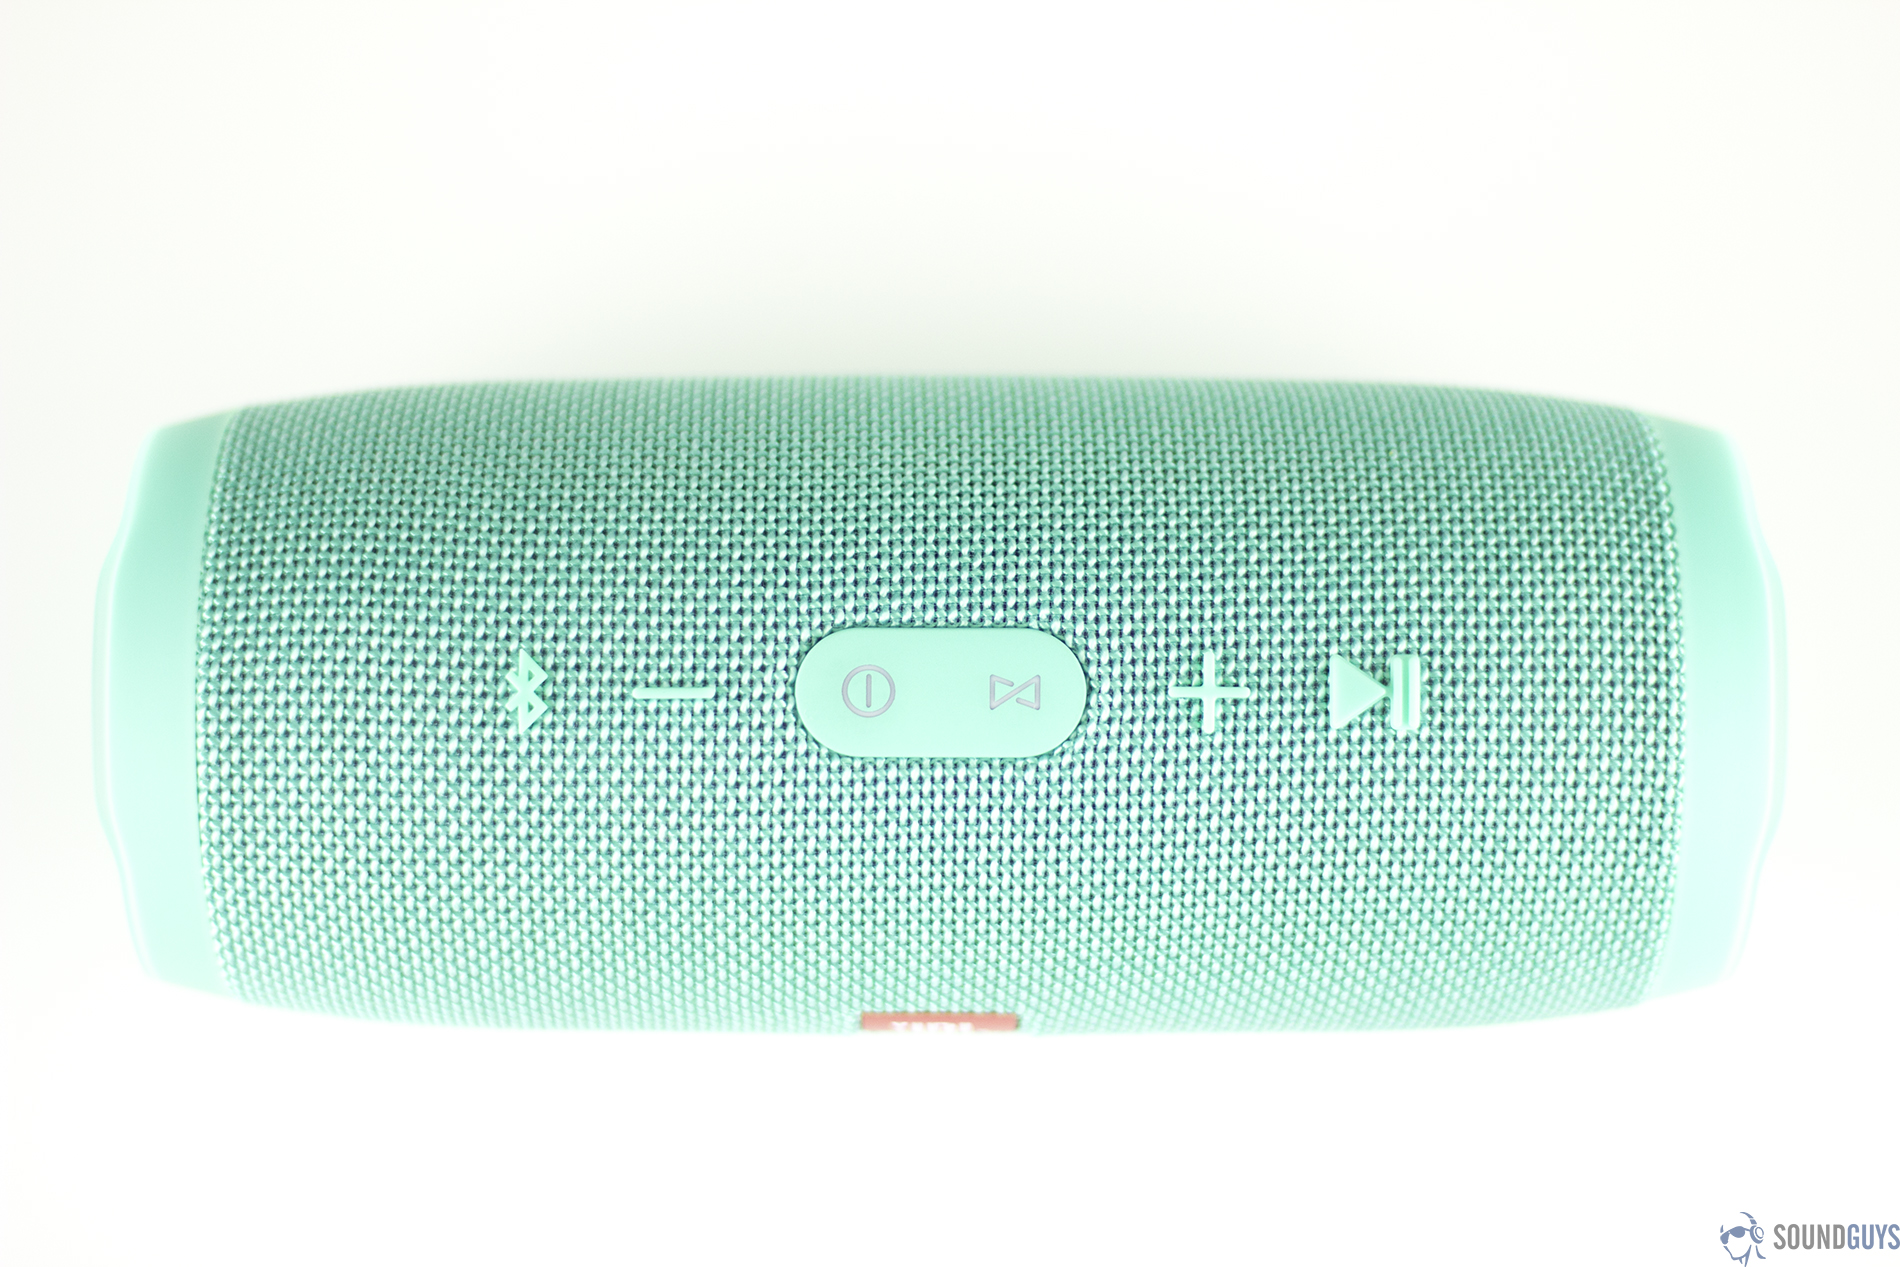 The playback buttons of the teal version of the JBL Charge 3. 